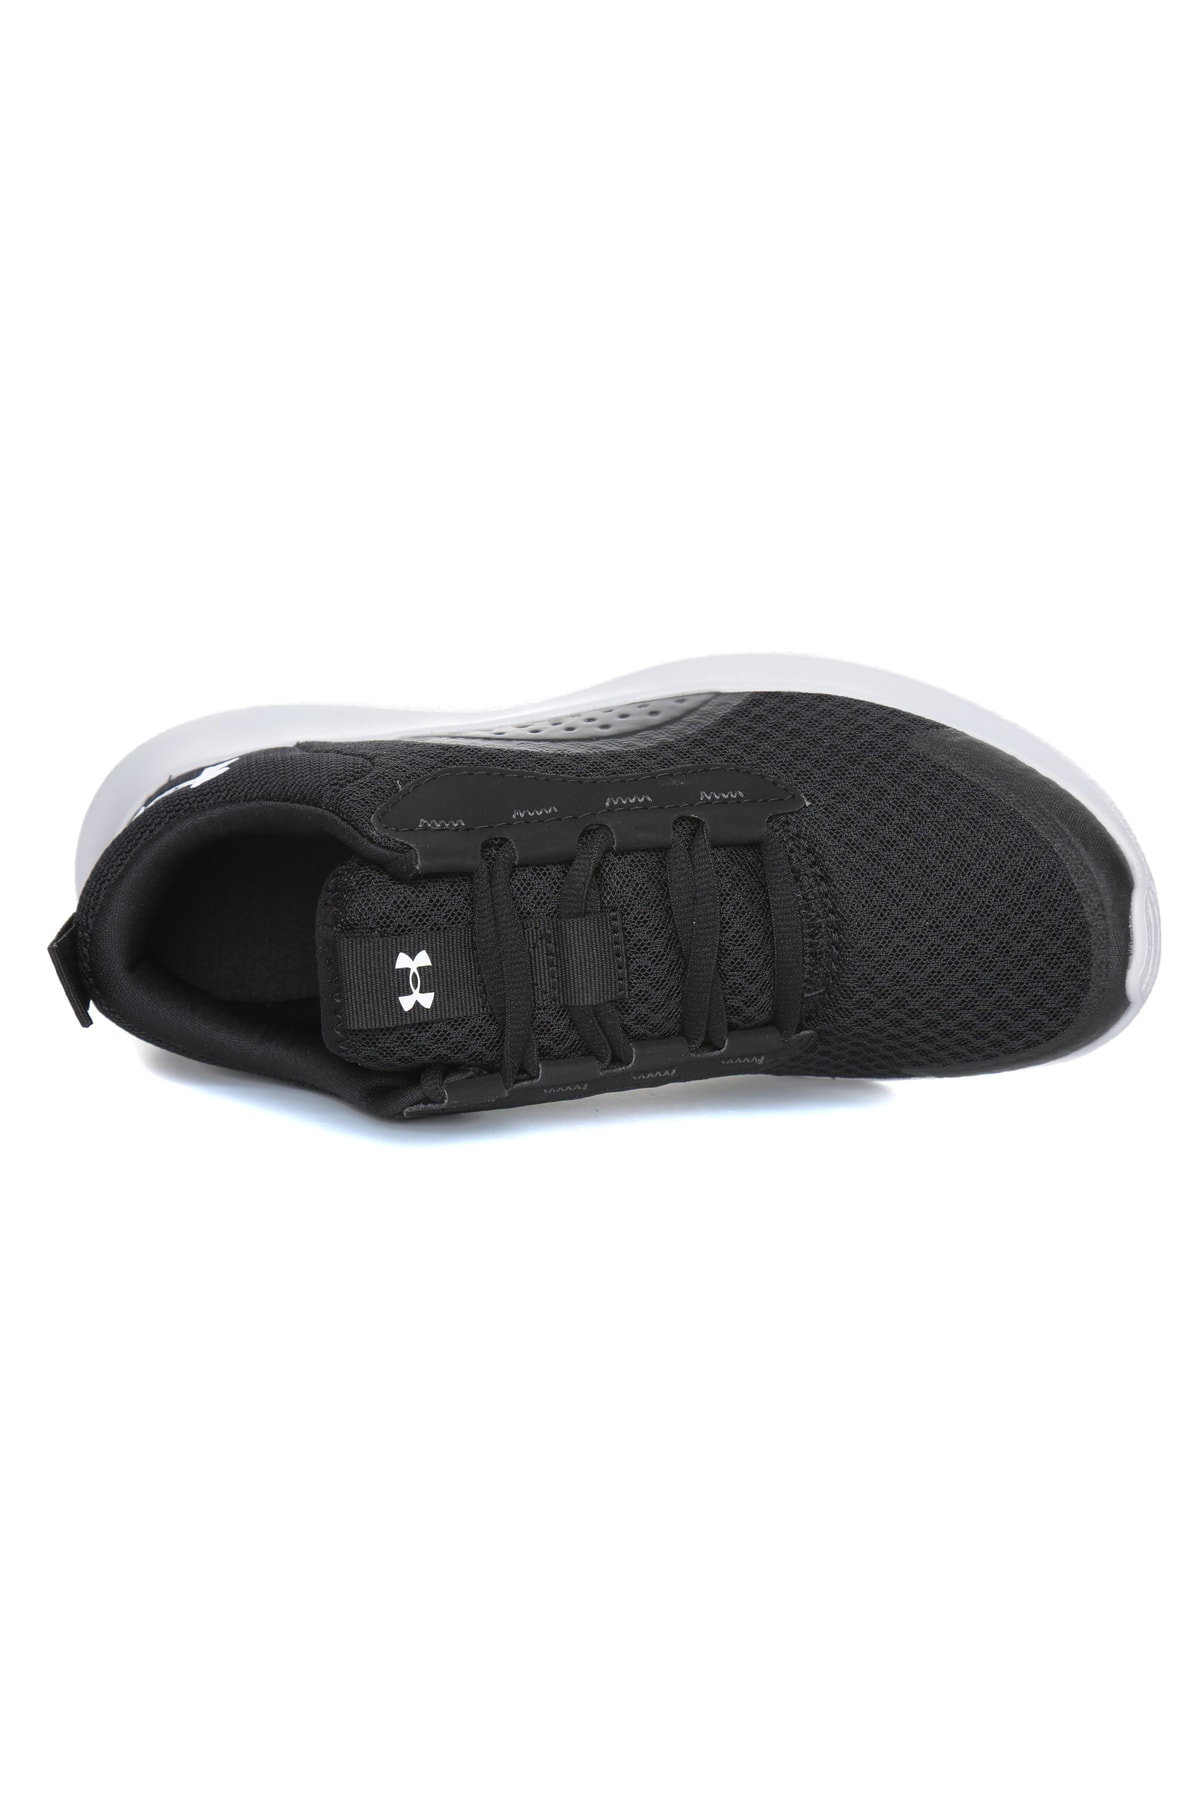 under armour training shoes women's